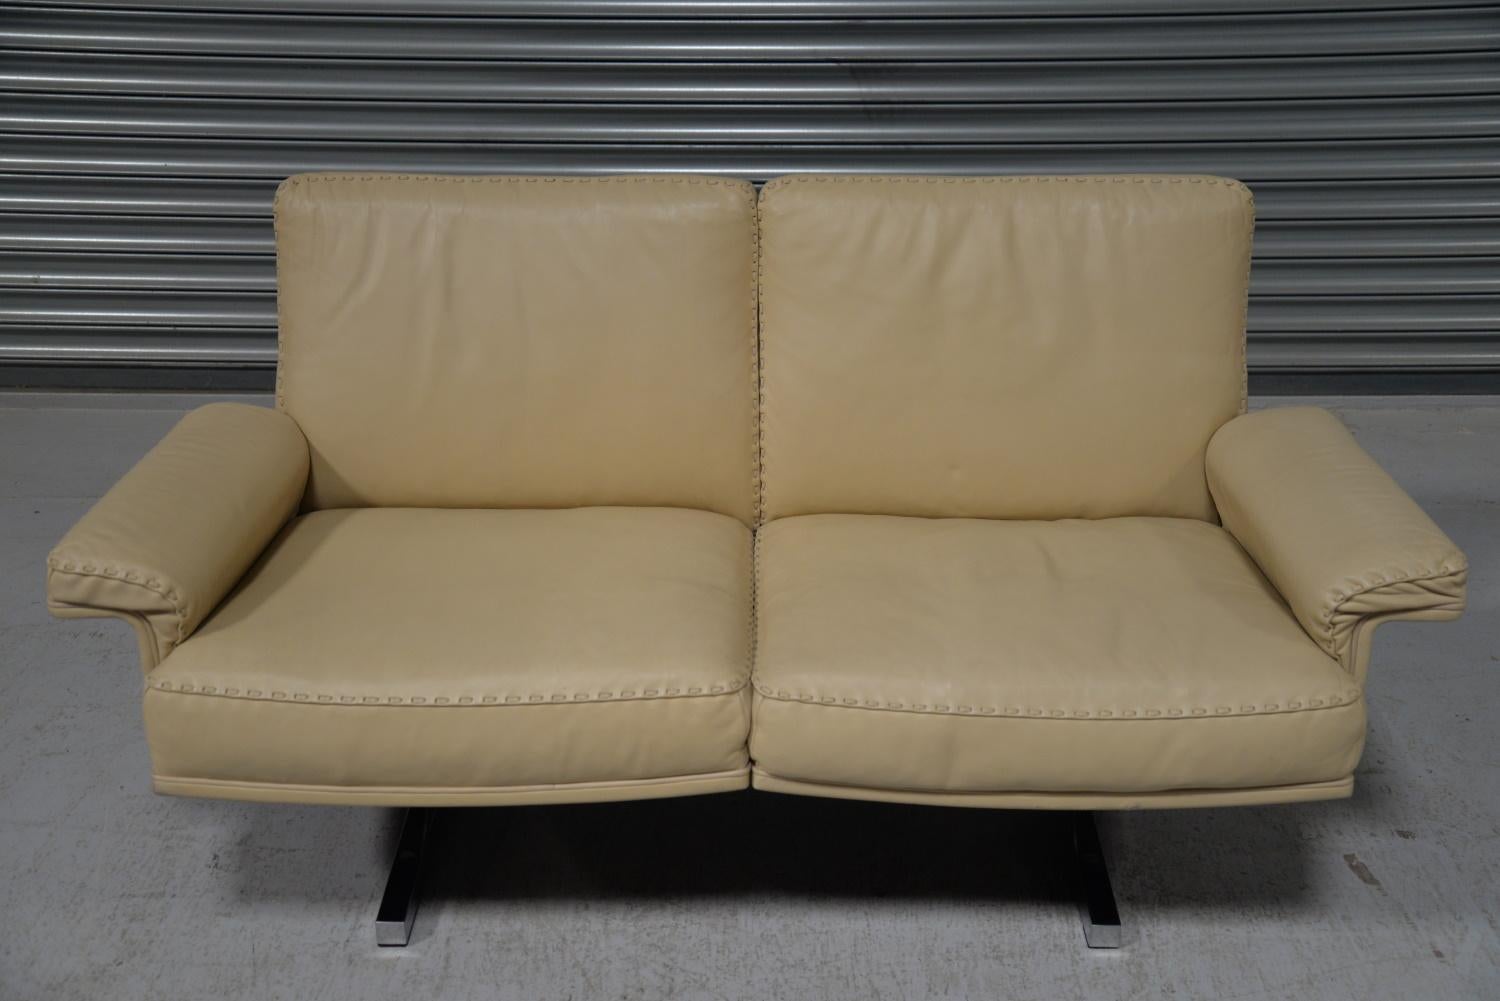 We are delighted to bring to you a rarely available and highly desirable De Sede DS 35 two-seat sofa or loveseat in beautiful soft cream aniline leather with superb whipstitch edge detail. Hand built in the early 1970s by De Sede craftsman from